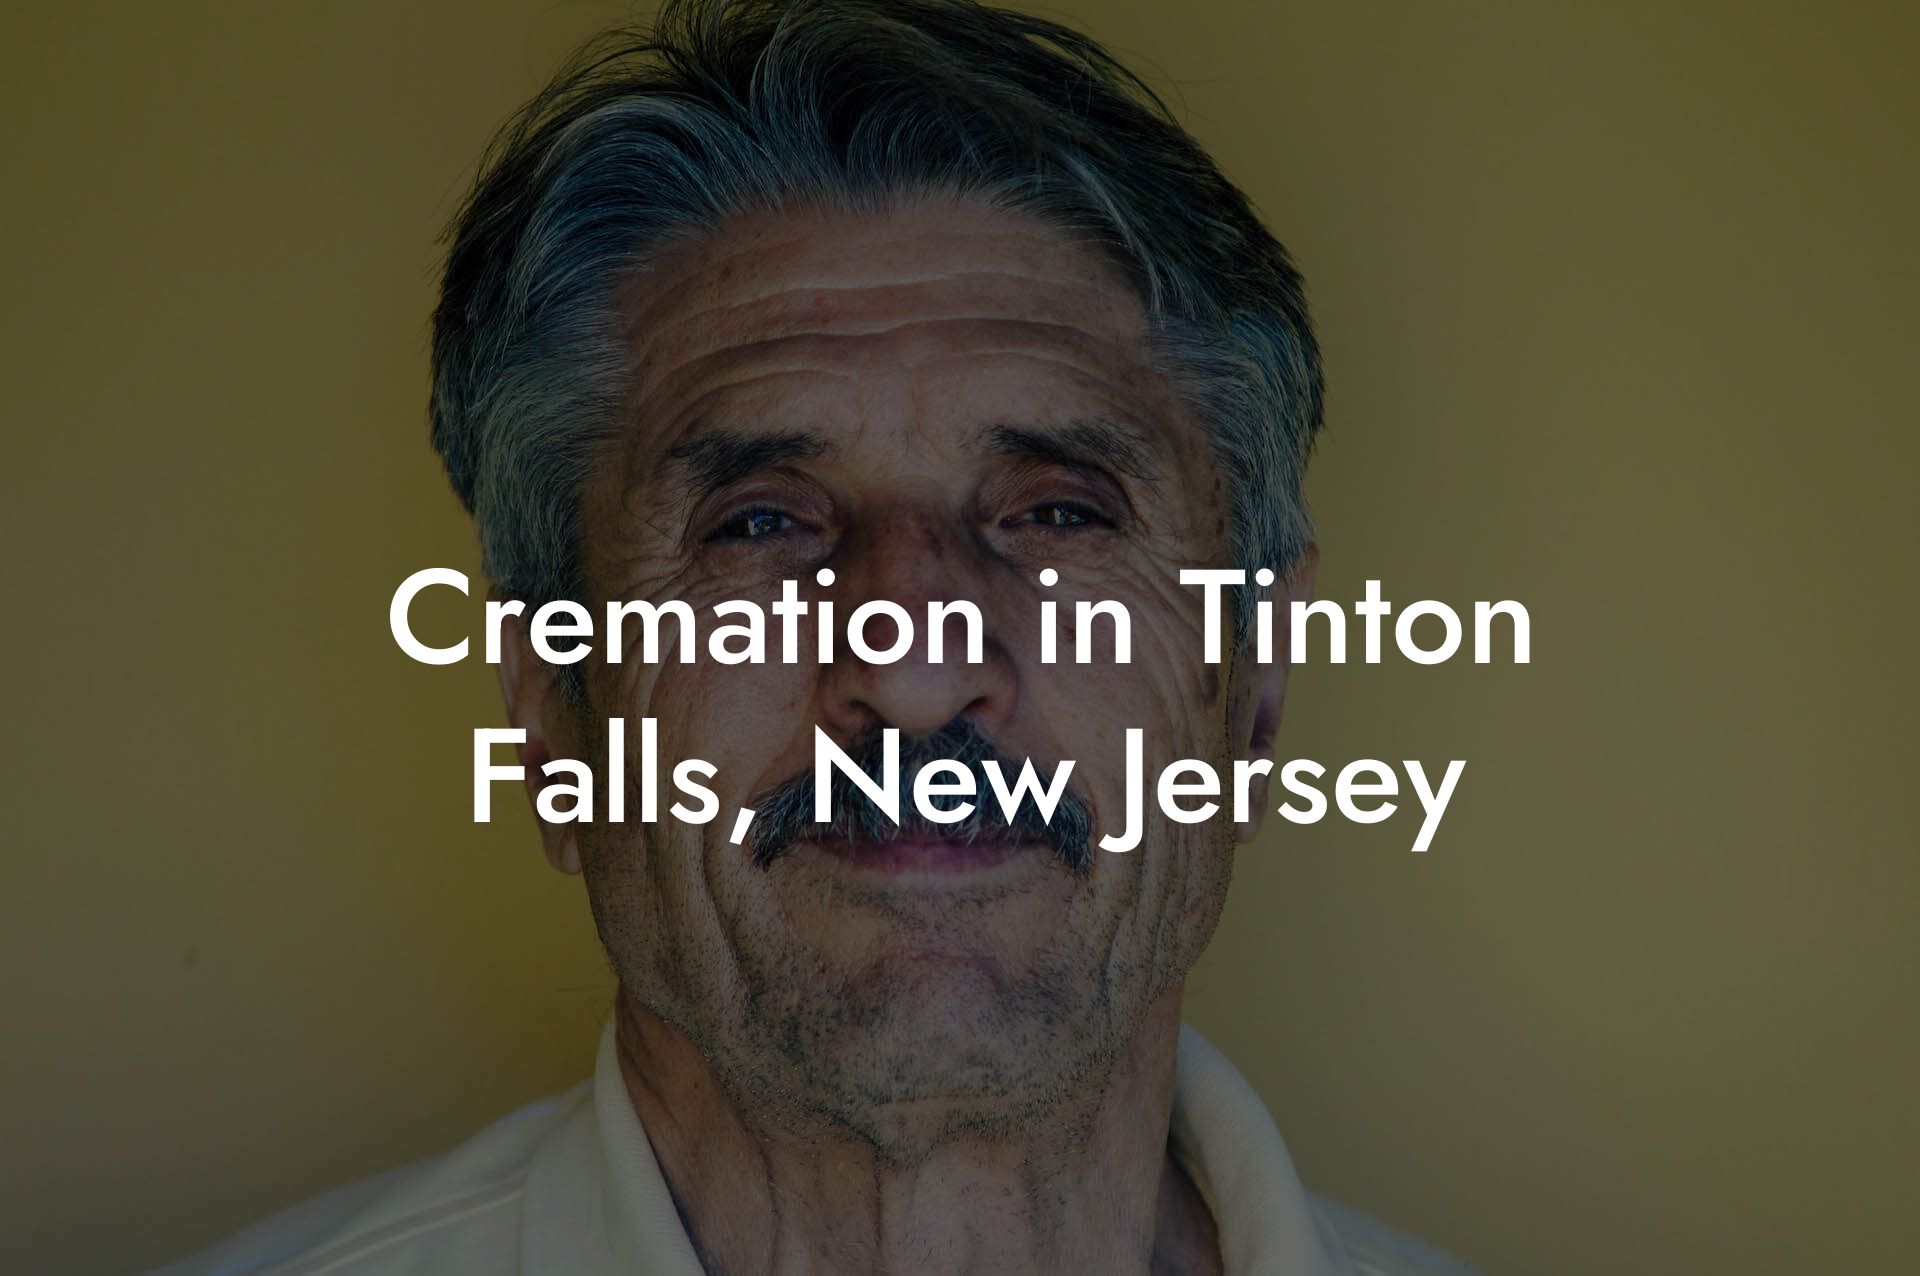 Cremation in Tinton Falls, New Jersey